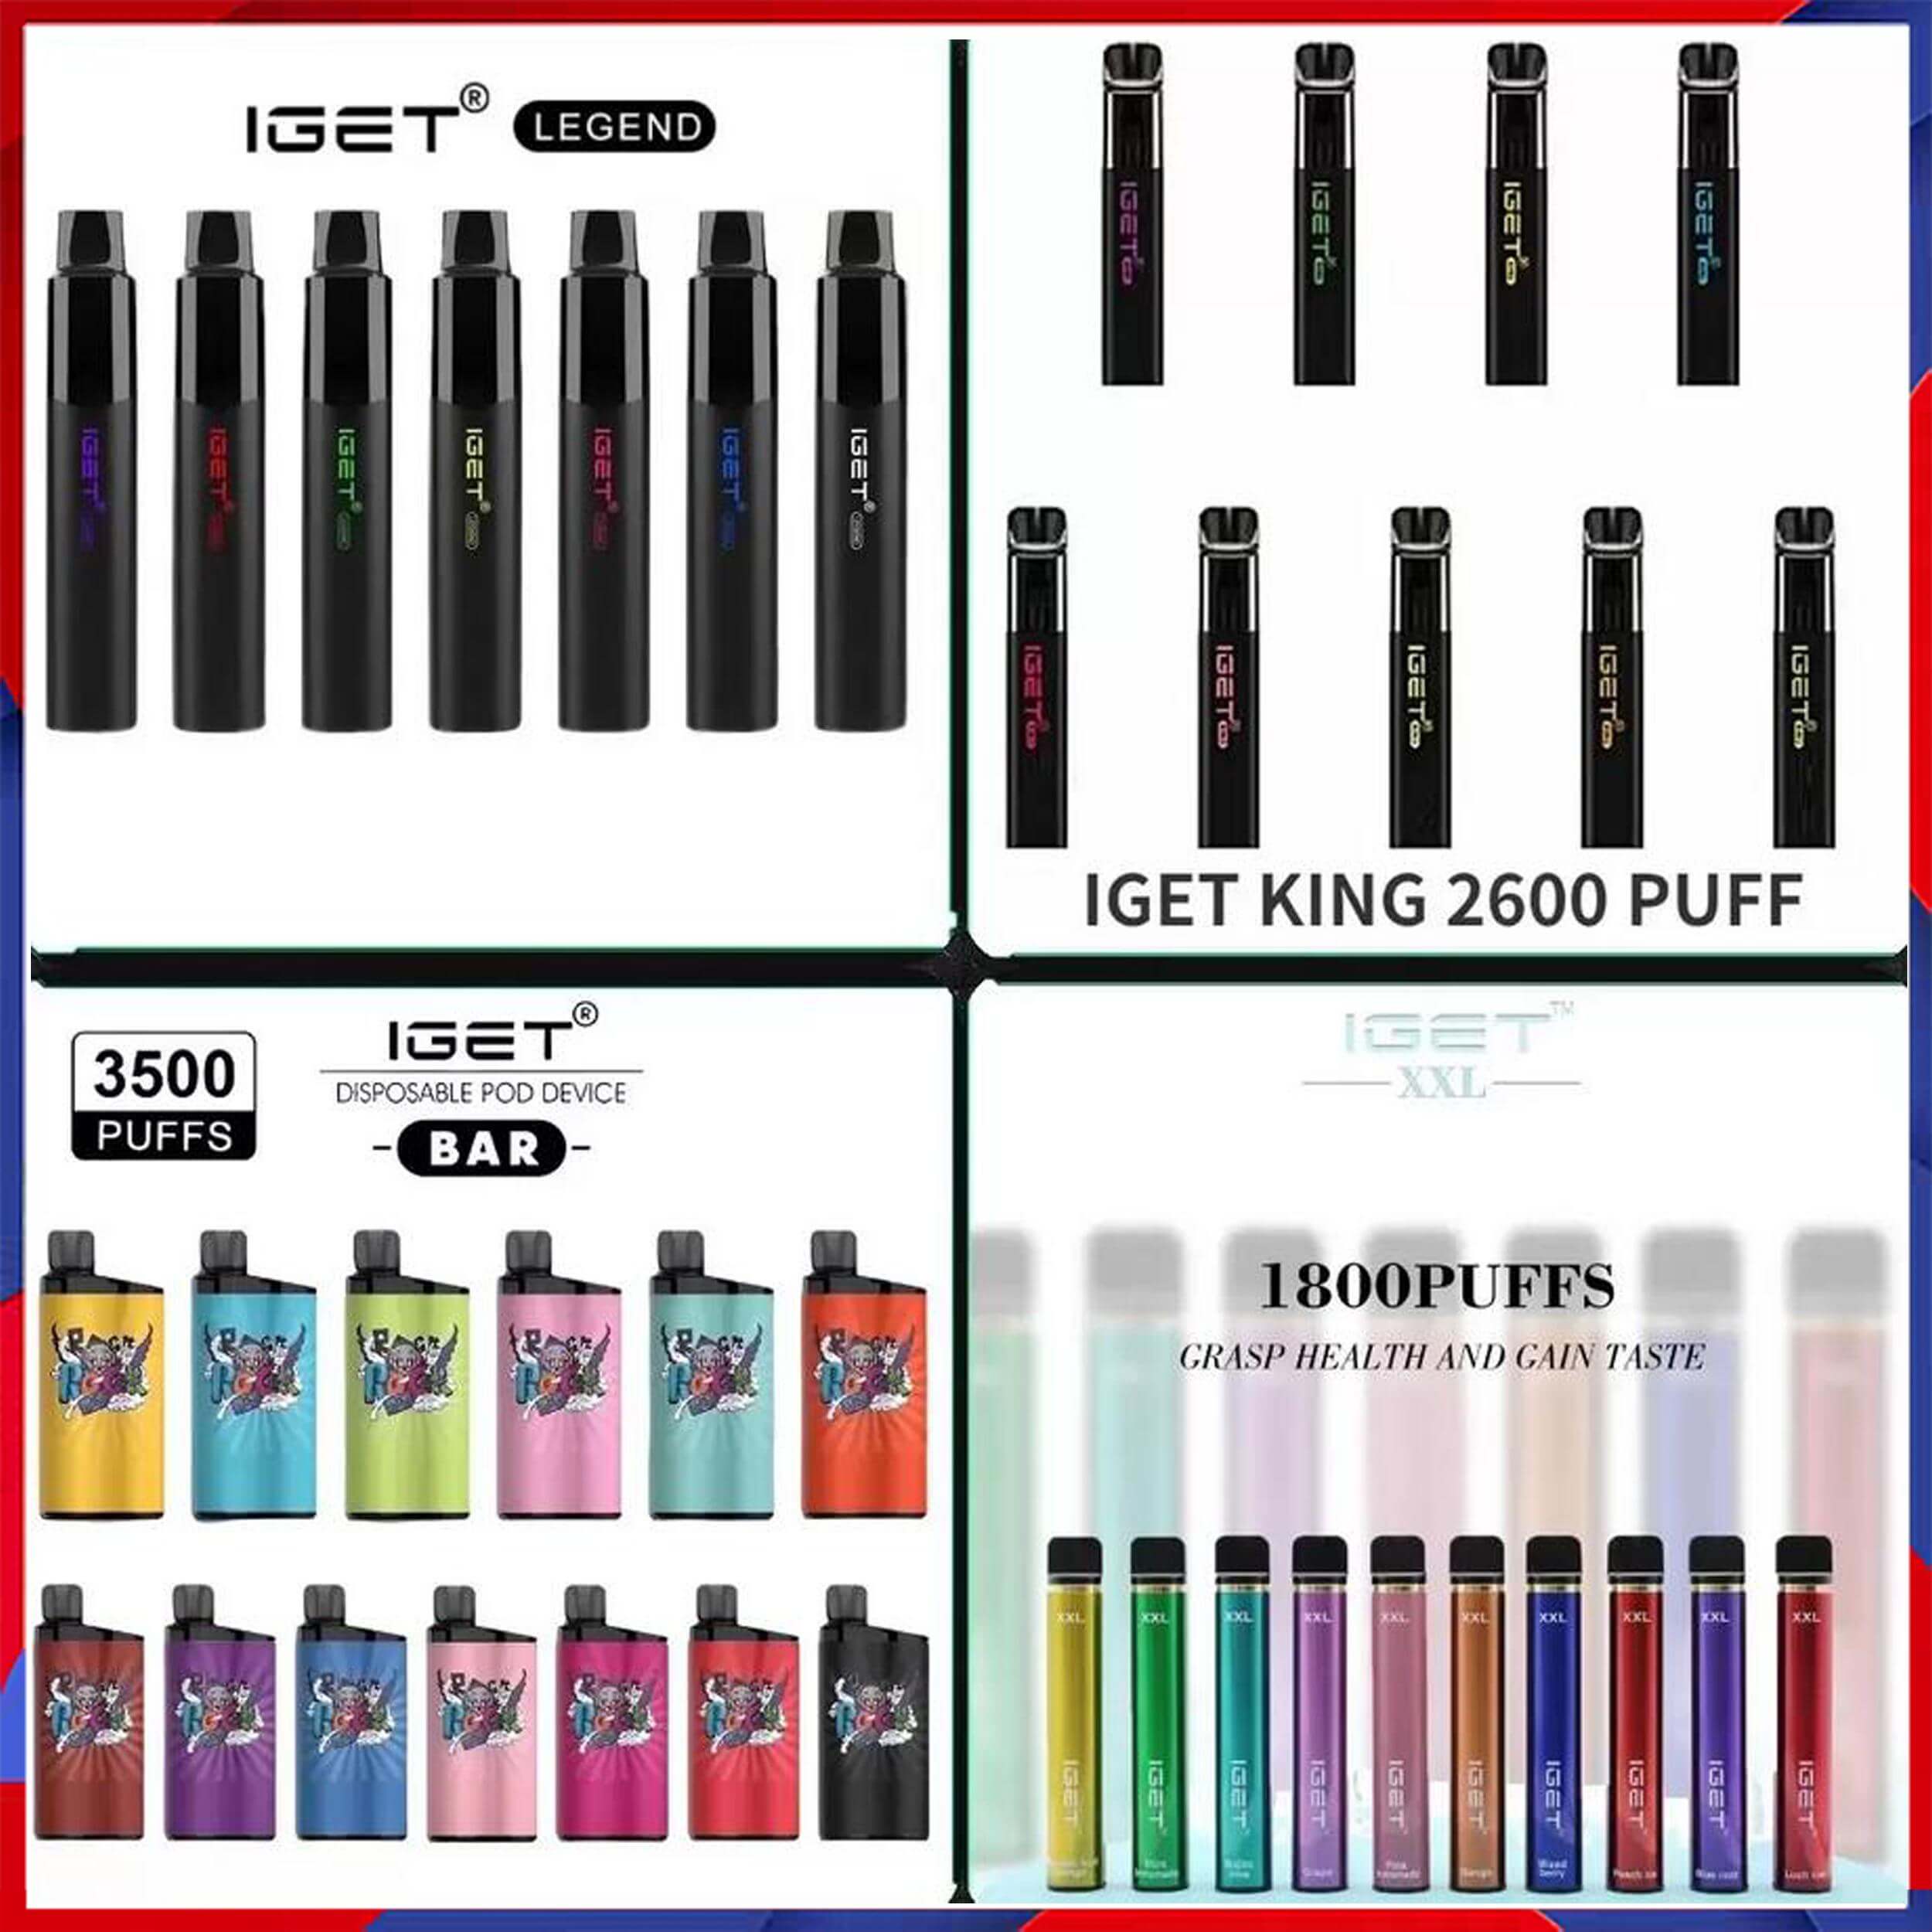 Brass Knuckles Battery Preheating Variable Voltage 900mAh 5 Colors In Stock E Cigarette Puff Pen For 510 Thraed Thick Oil Cartridge VS Vision Spinner 